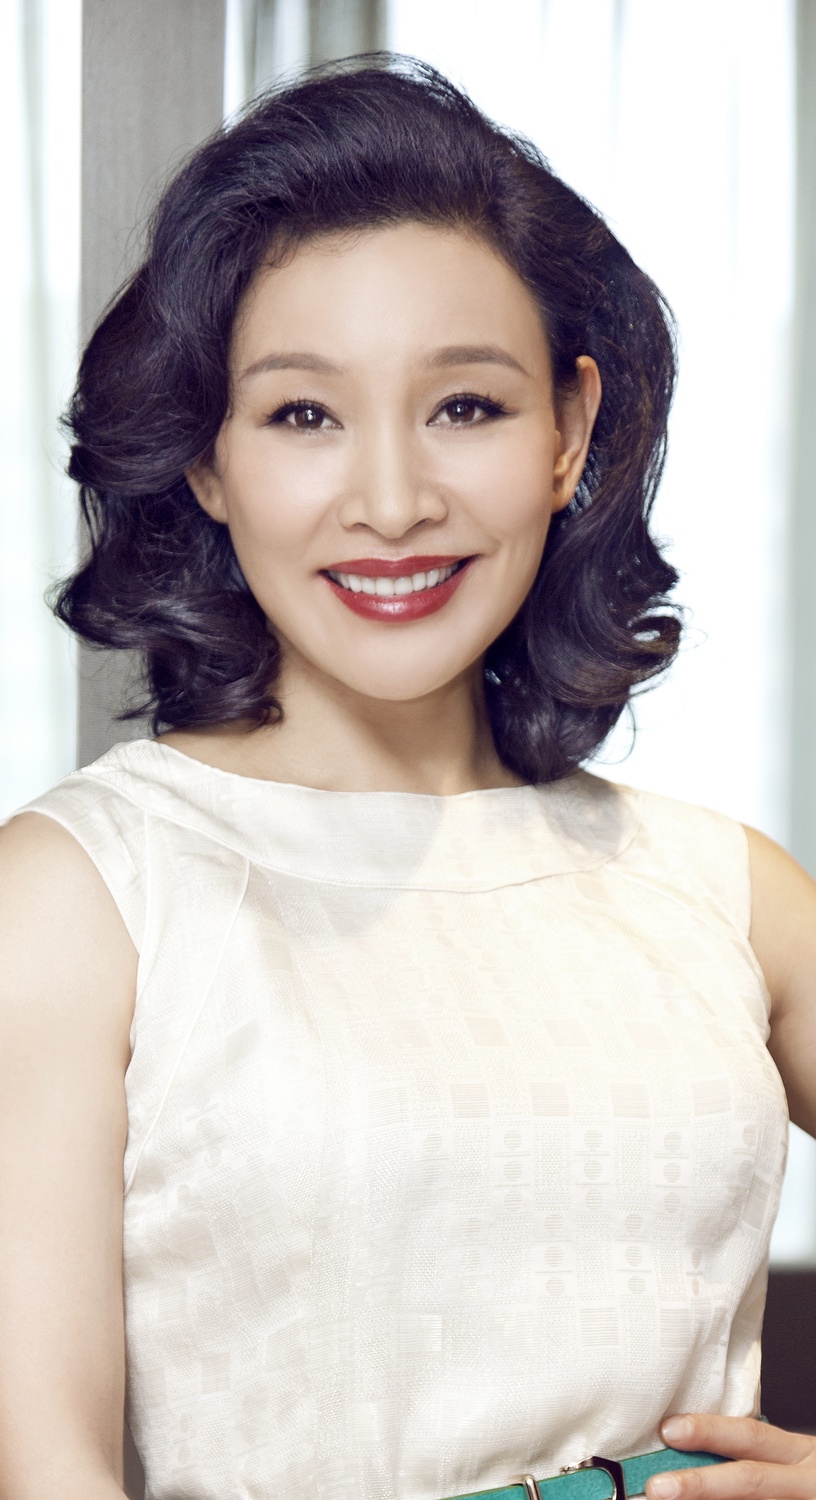 How tall is Joan Chen?